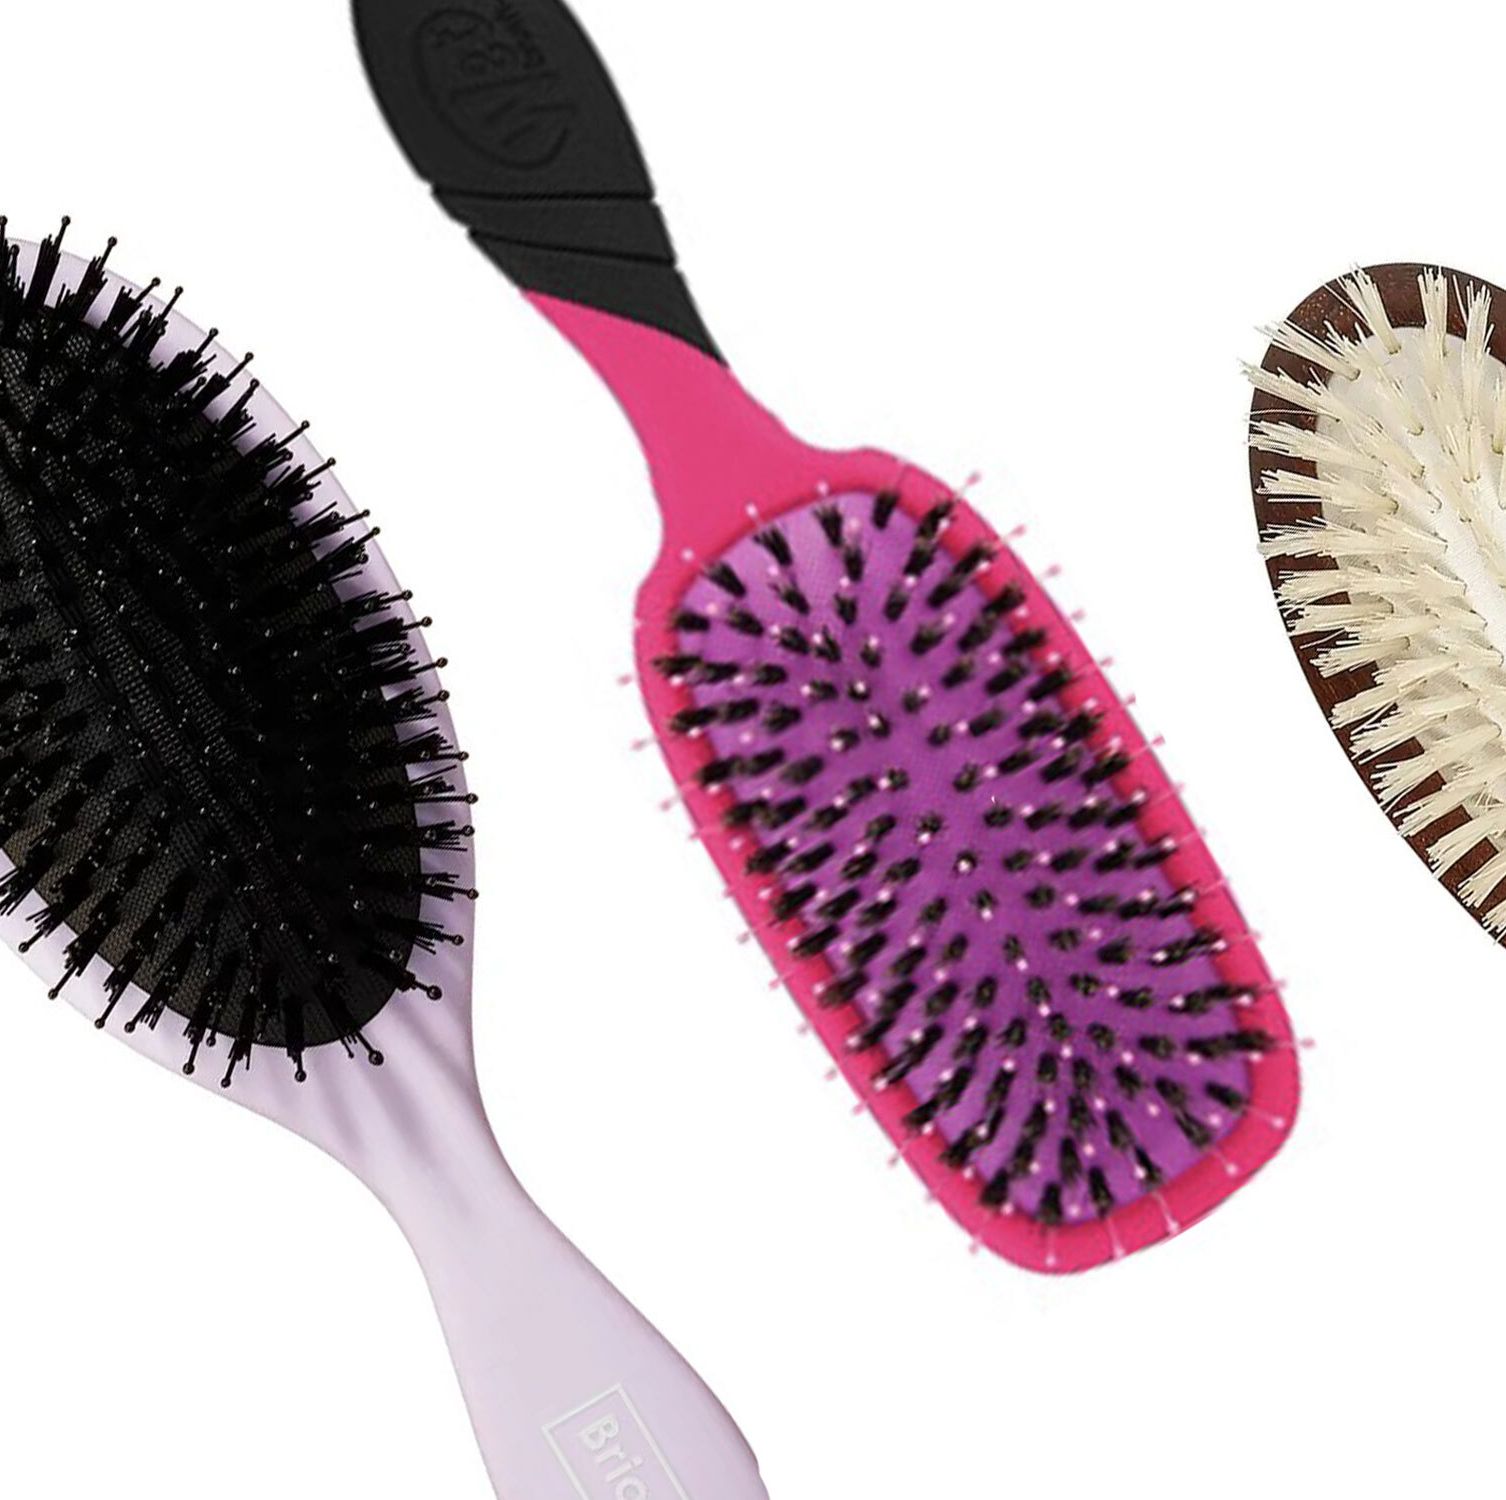 15 Best Boar Bristle Brushes for Every Hair Type